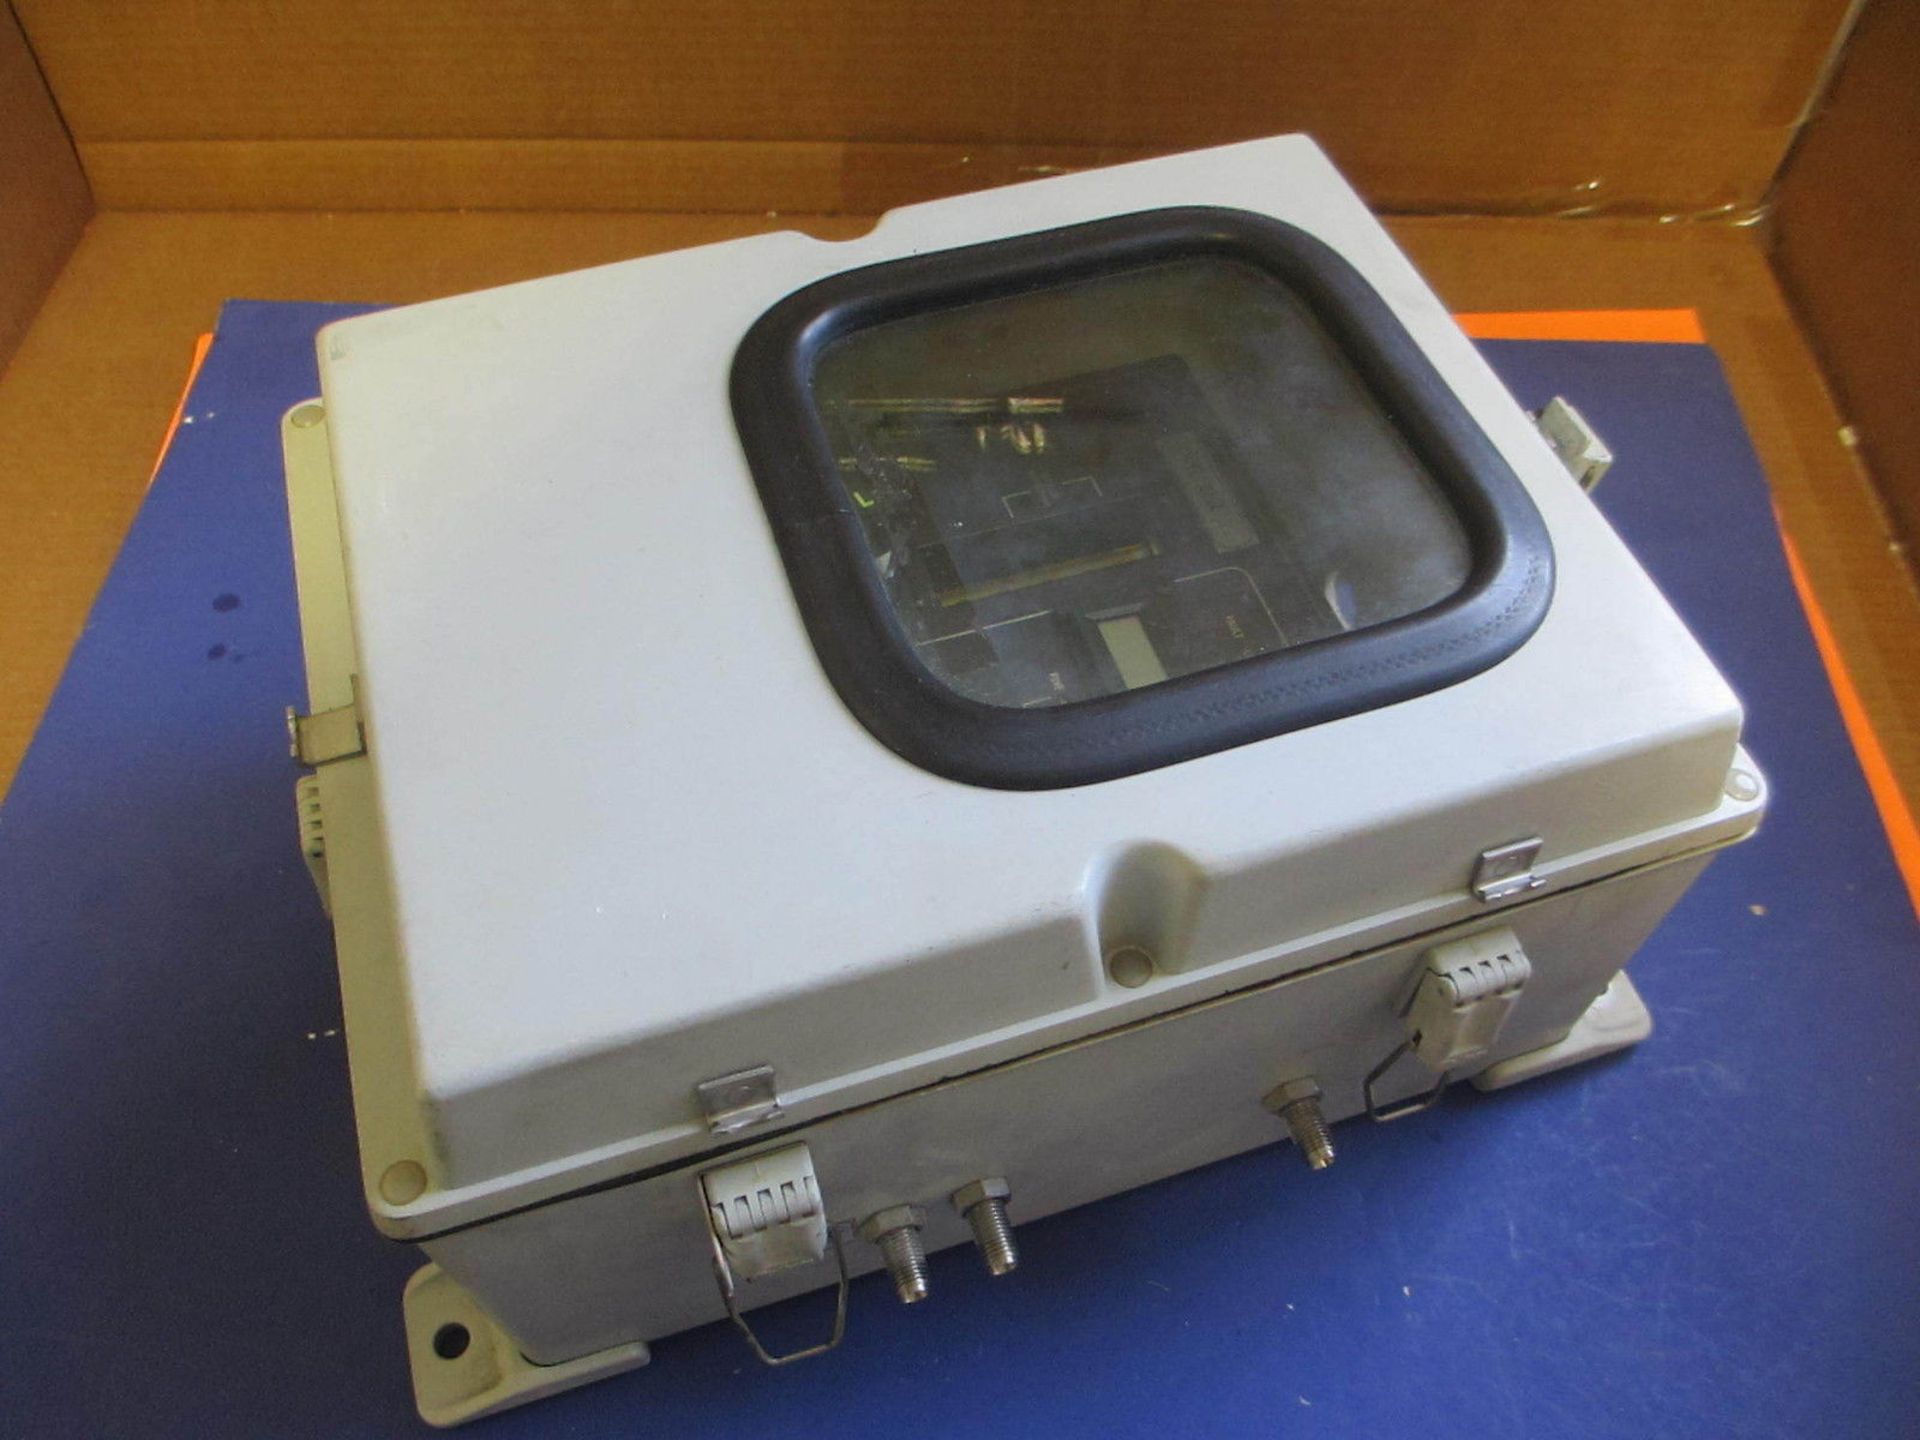 Detcon Model SD1 Gas Sample System - See Additional Information for Specs